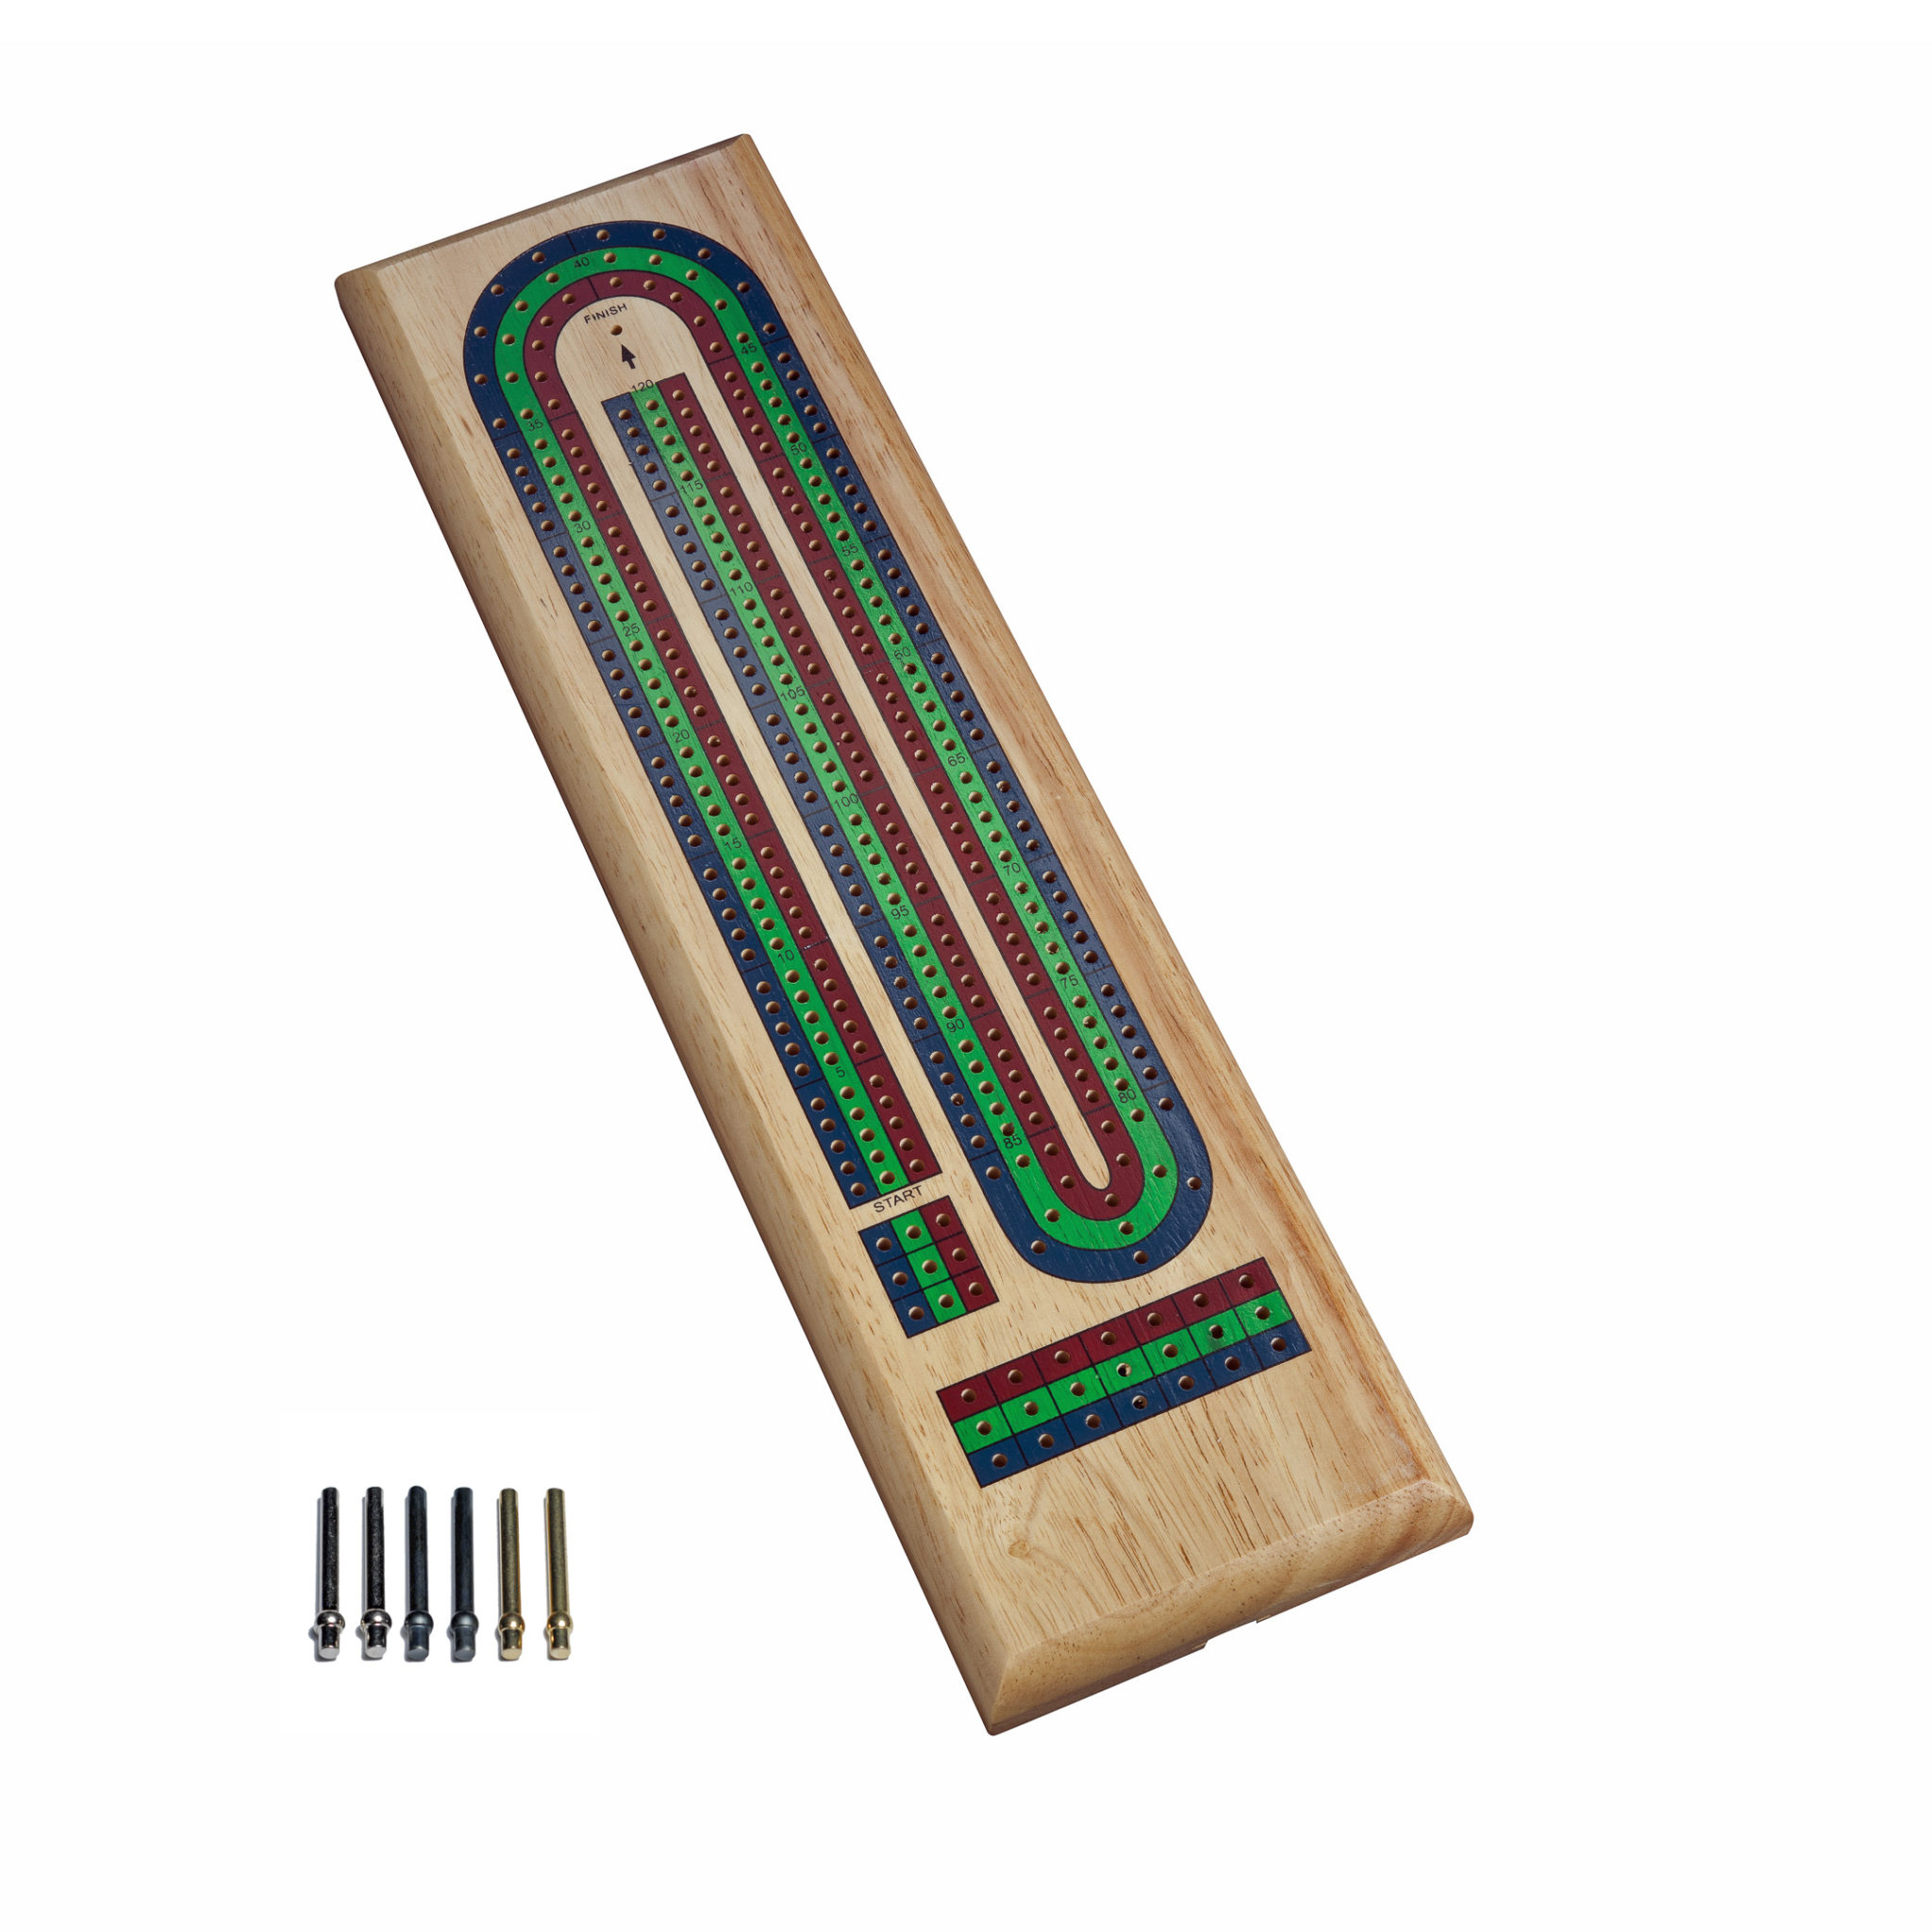 4 dark & 4 light color Eight Wood Cribbage Board Pegs 